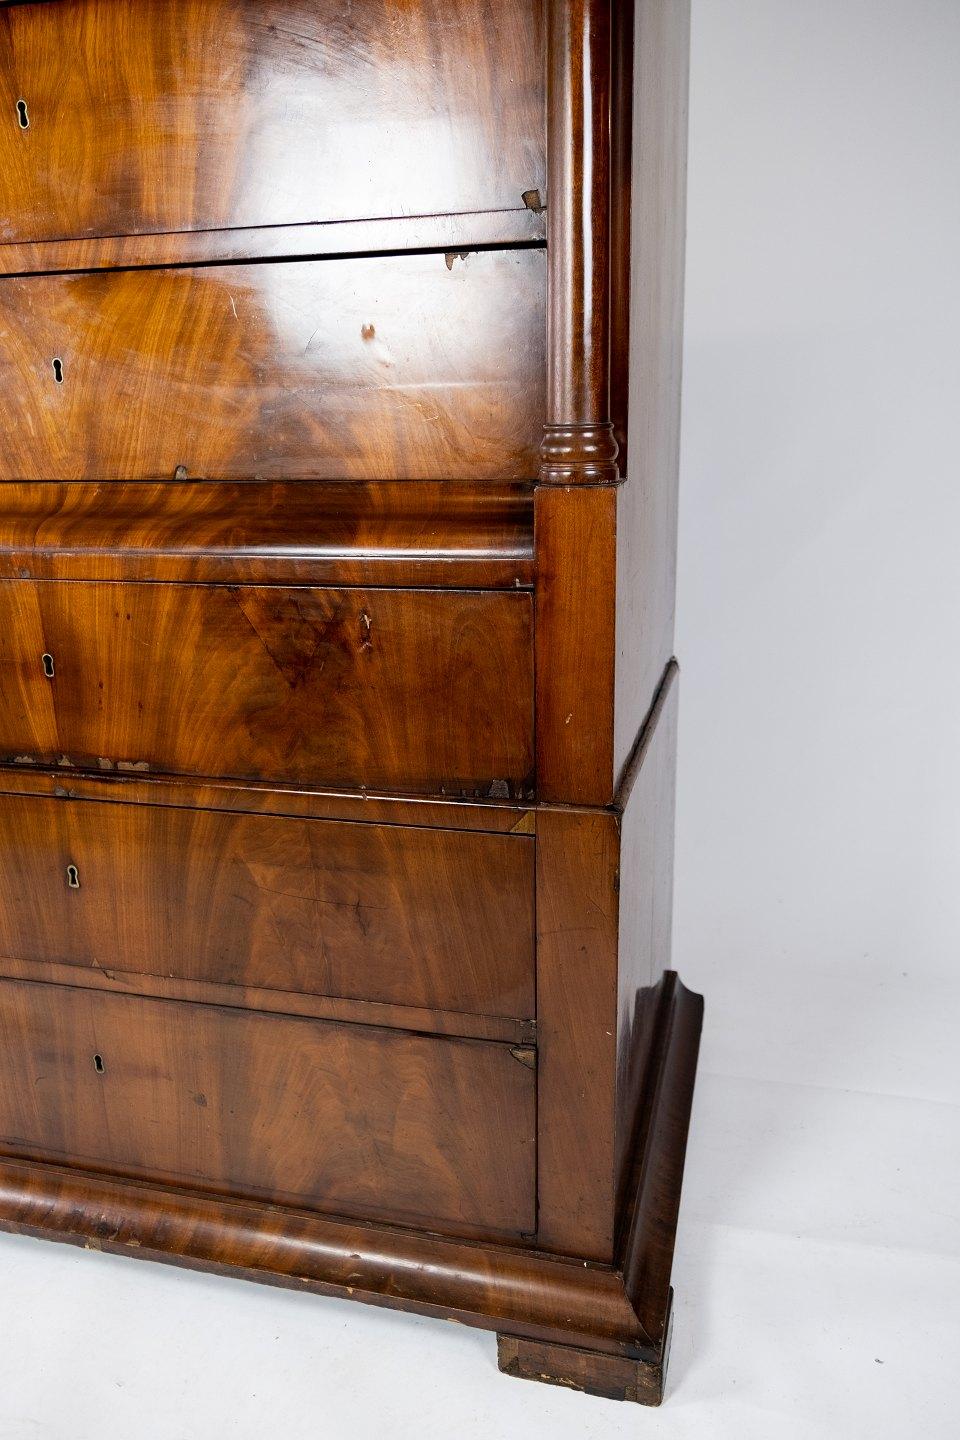 Exquisite Late Empire Style Mahogany Chiffonier from the 1840s: a stunning testament to the elegance and craftsmanship of the era.

This beautiful piece is crafted from rich mahogany, a wood highly favored during the late Empire period, renowned for